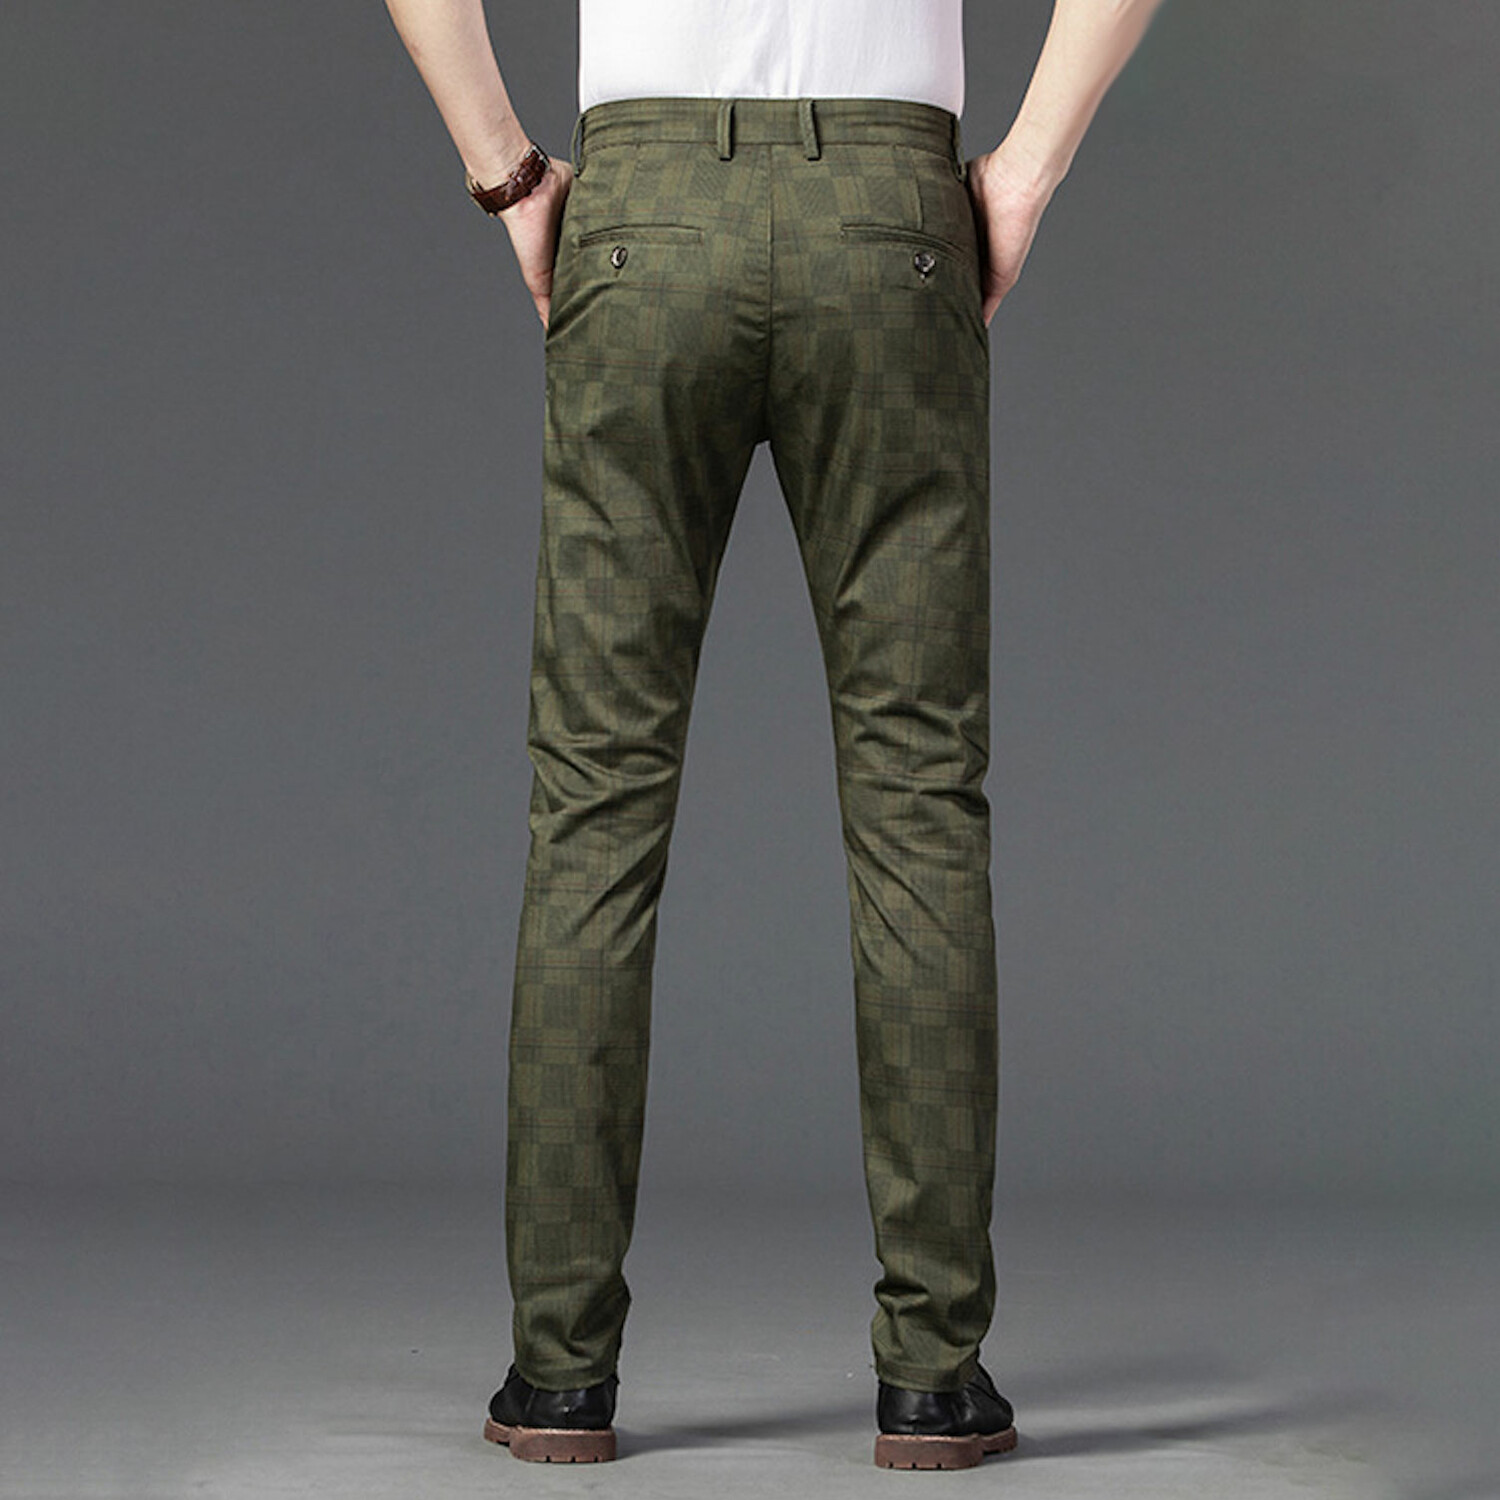 Plaid Chino Pants // Style 1 // Green (32) - Celino Chino Pants - Touch ...